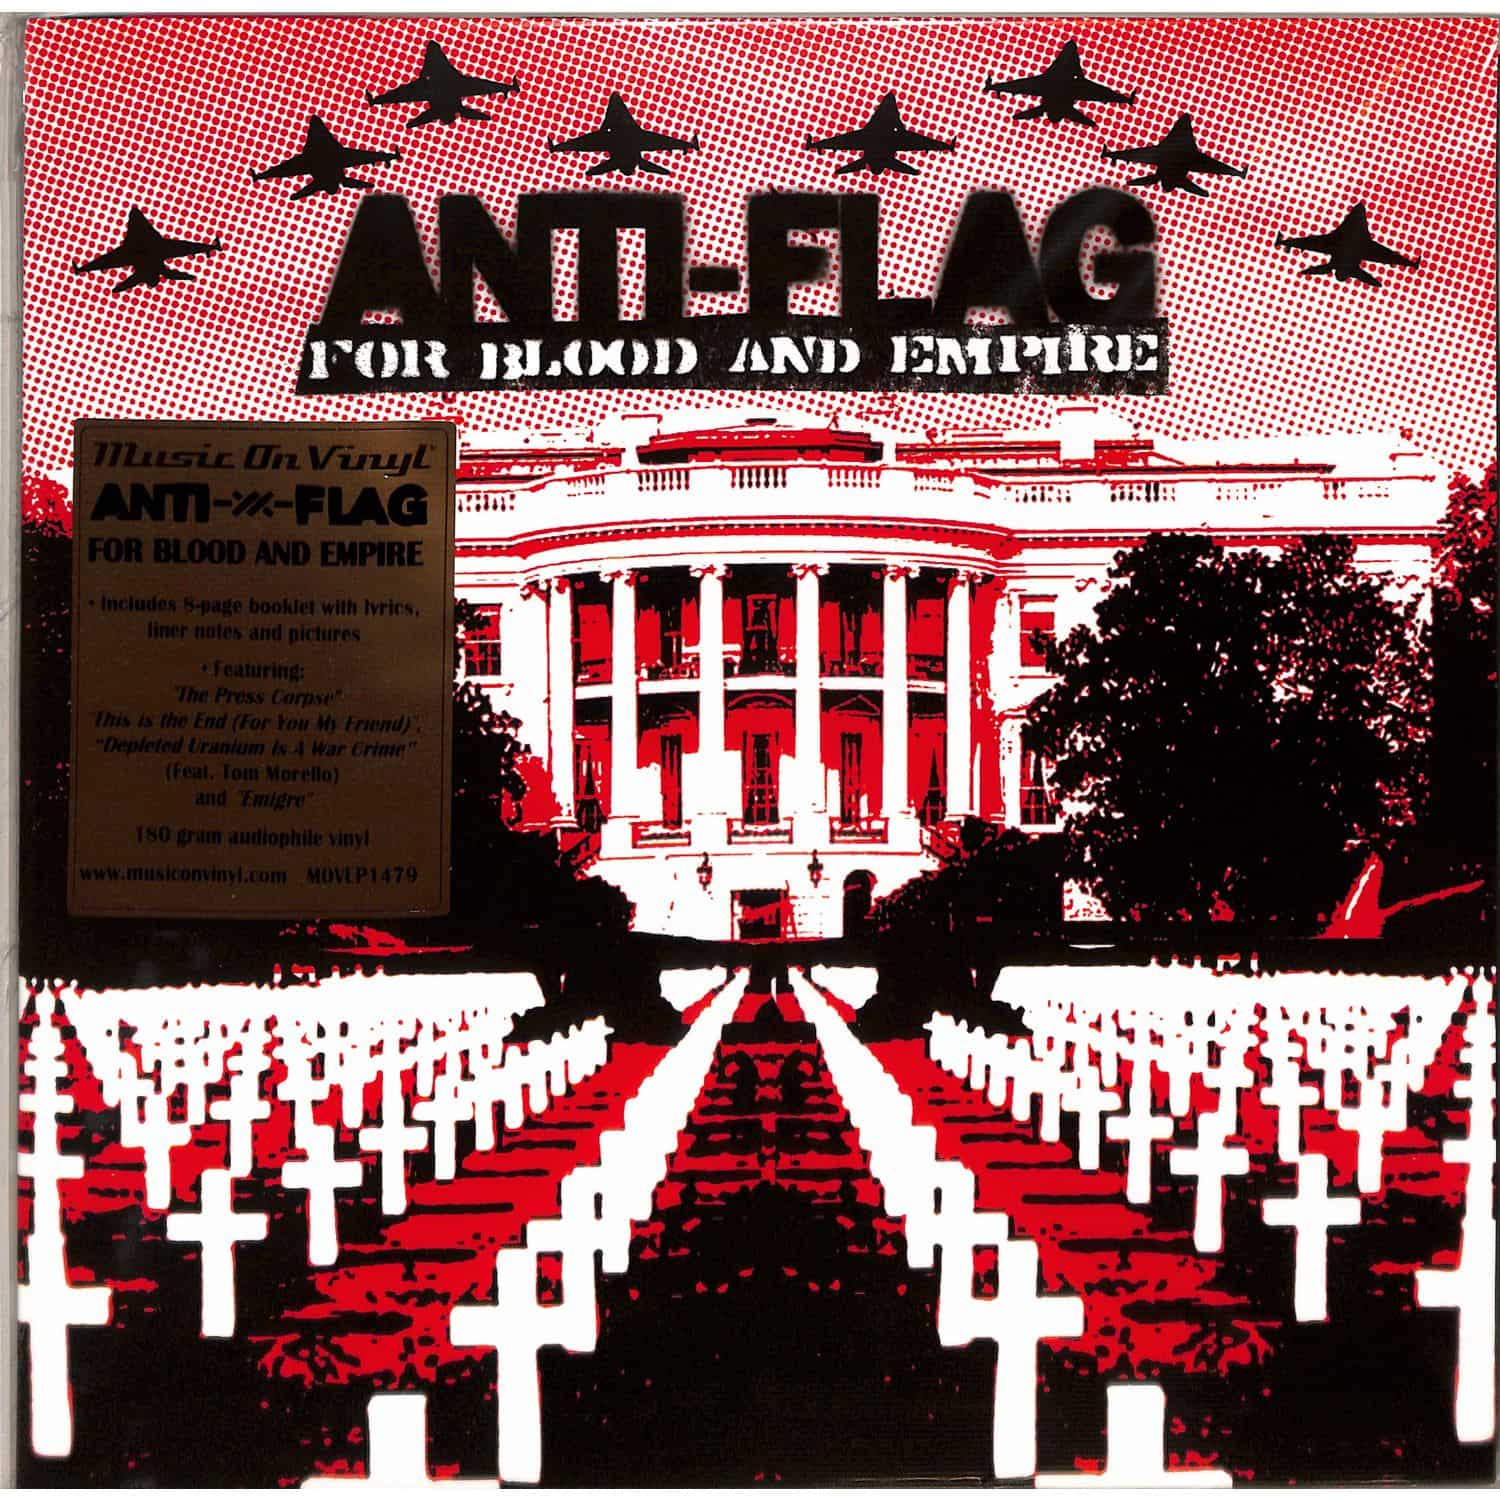 Anti-Flag - FOR BLOOD & EMPIRE 